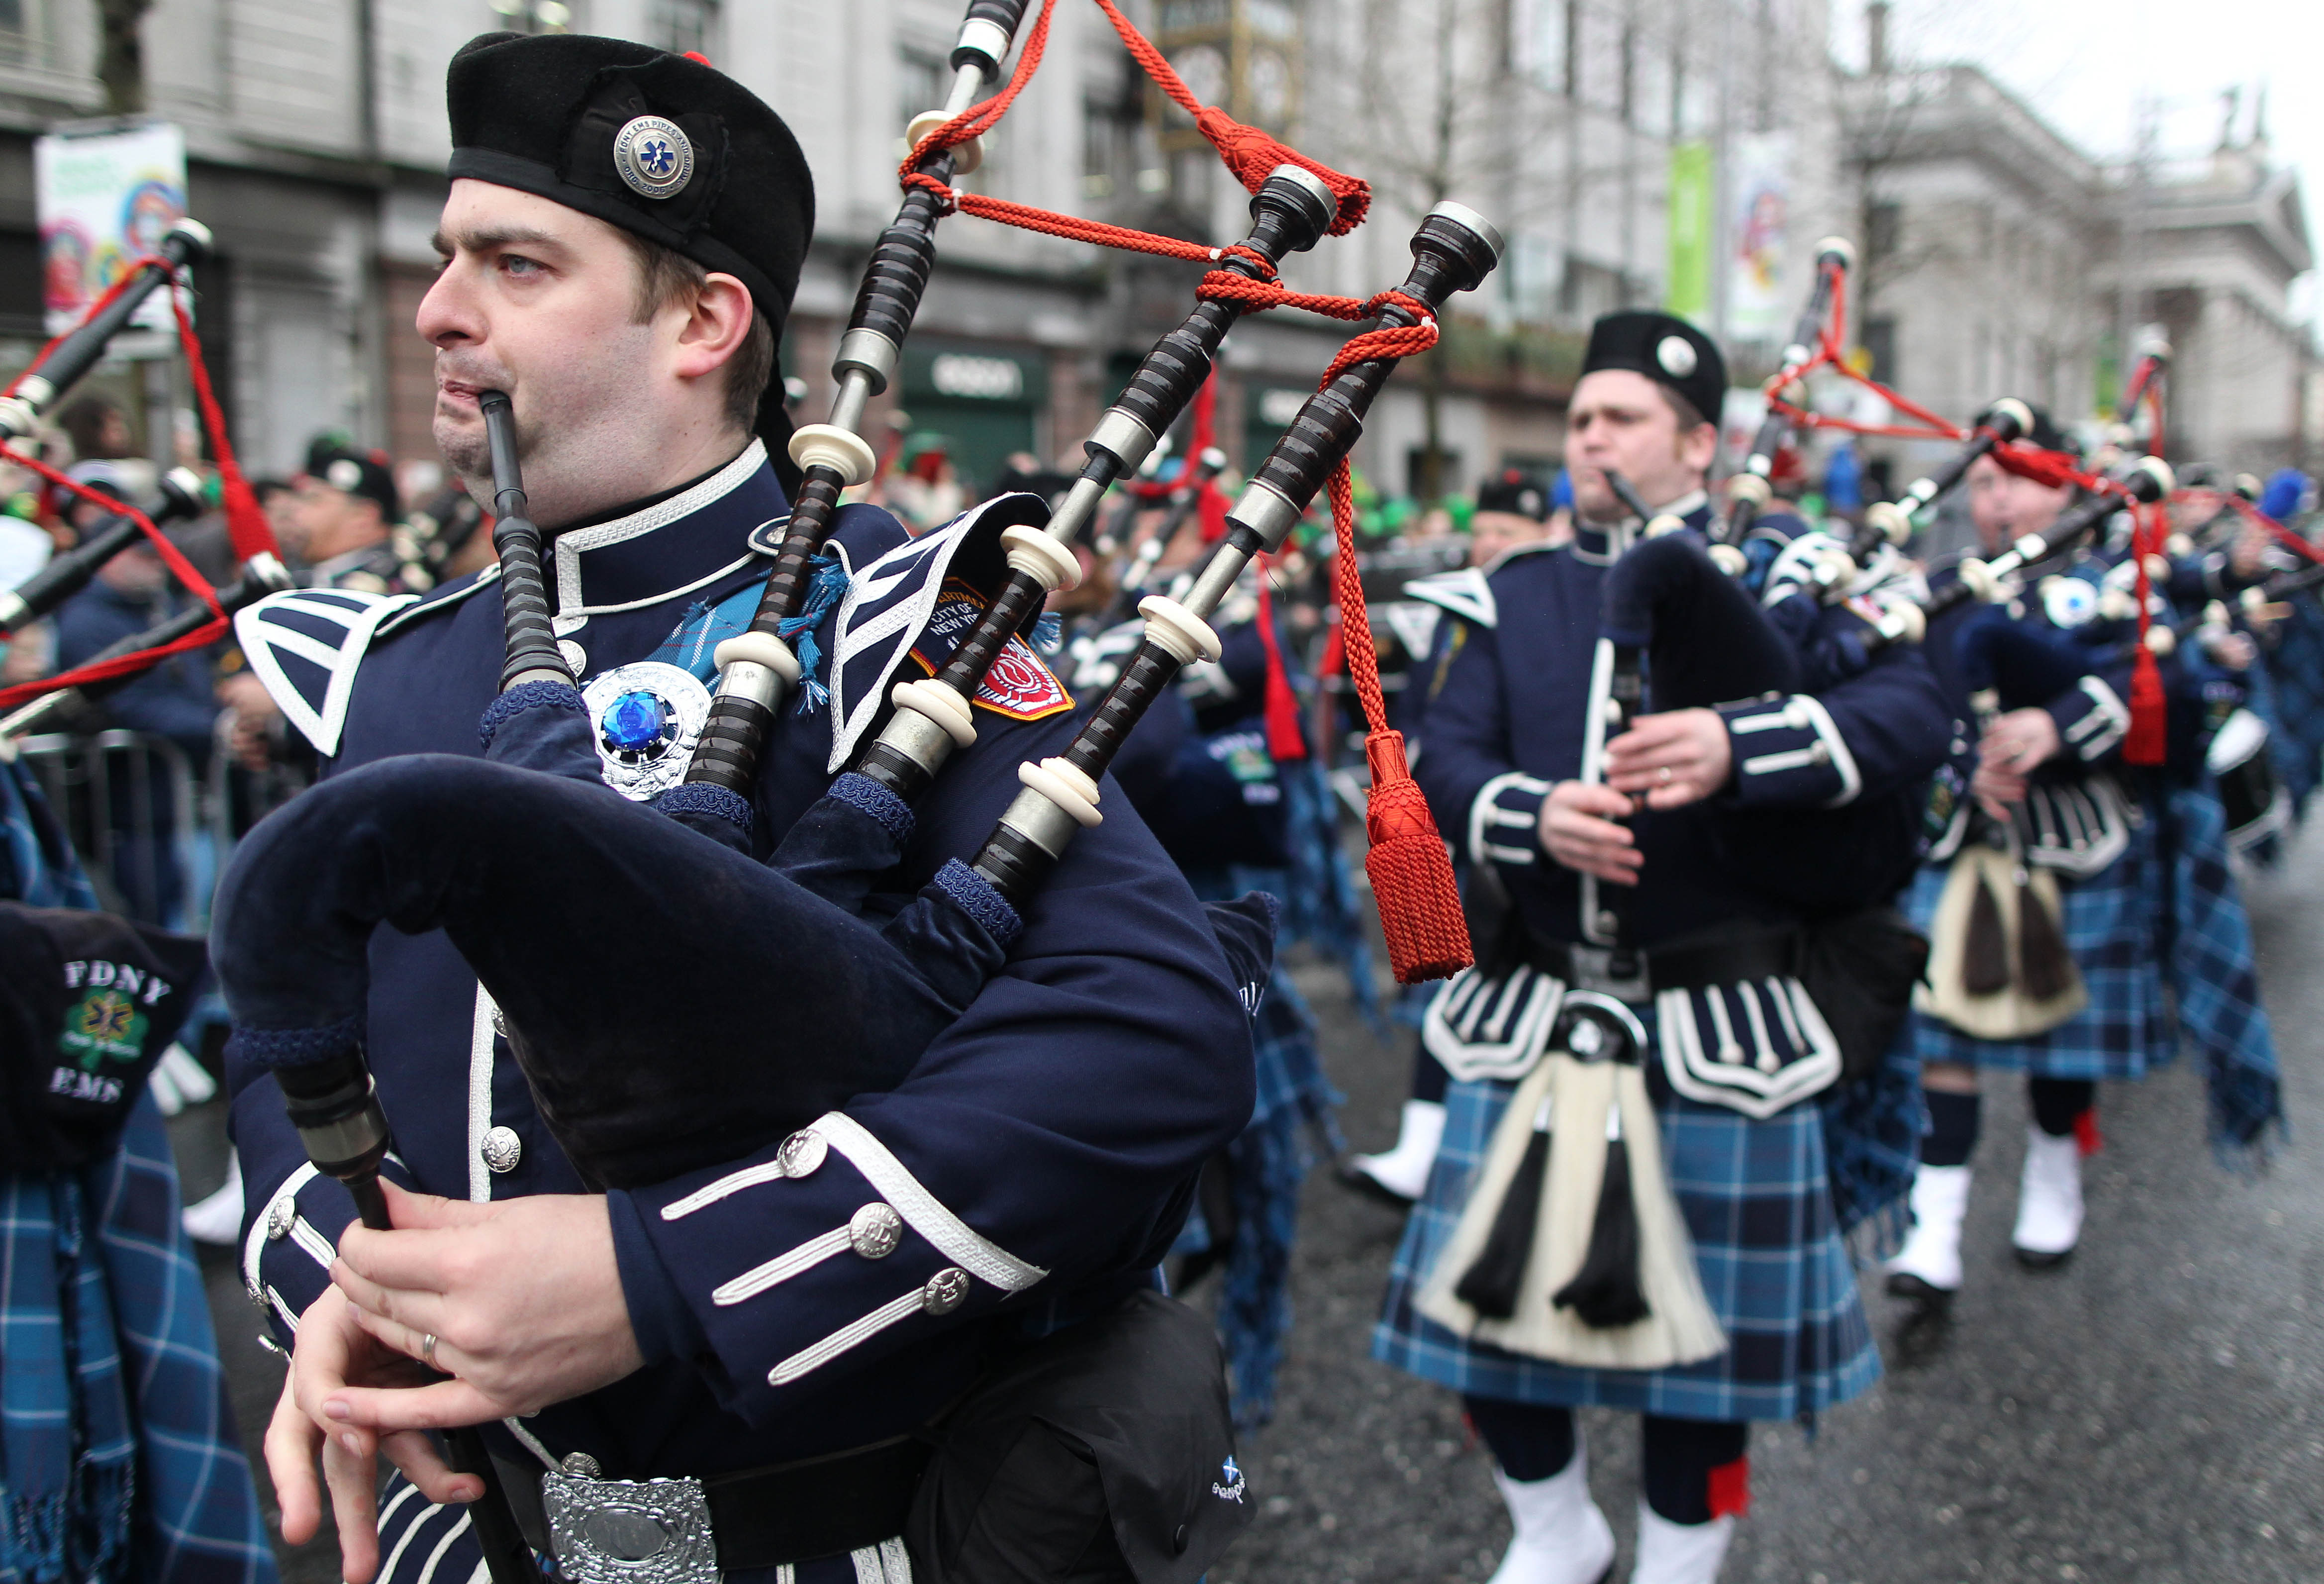 Members of the New York City Fire department play the bagpipes on the parade route during St Patrick's Day festivities in Dublin on March 17, 2013. (Getty)